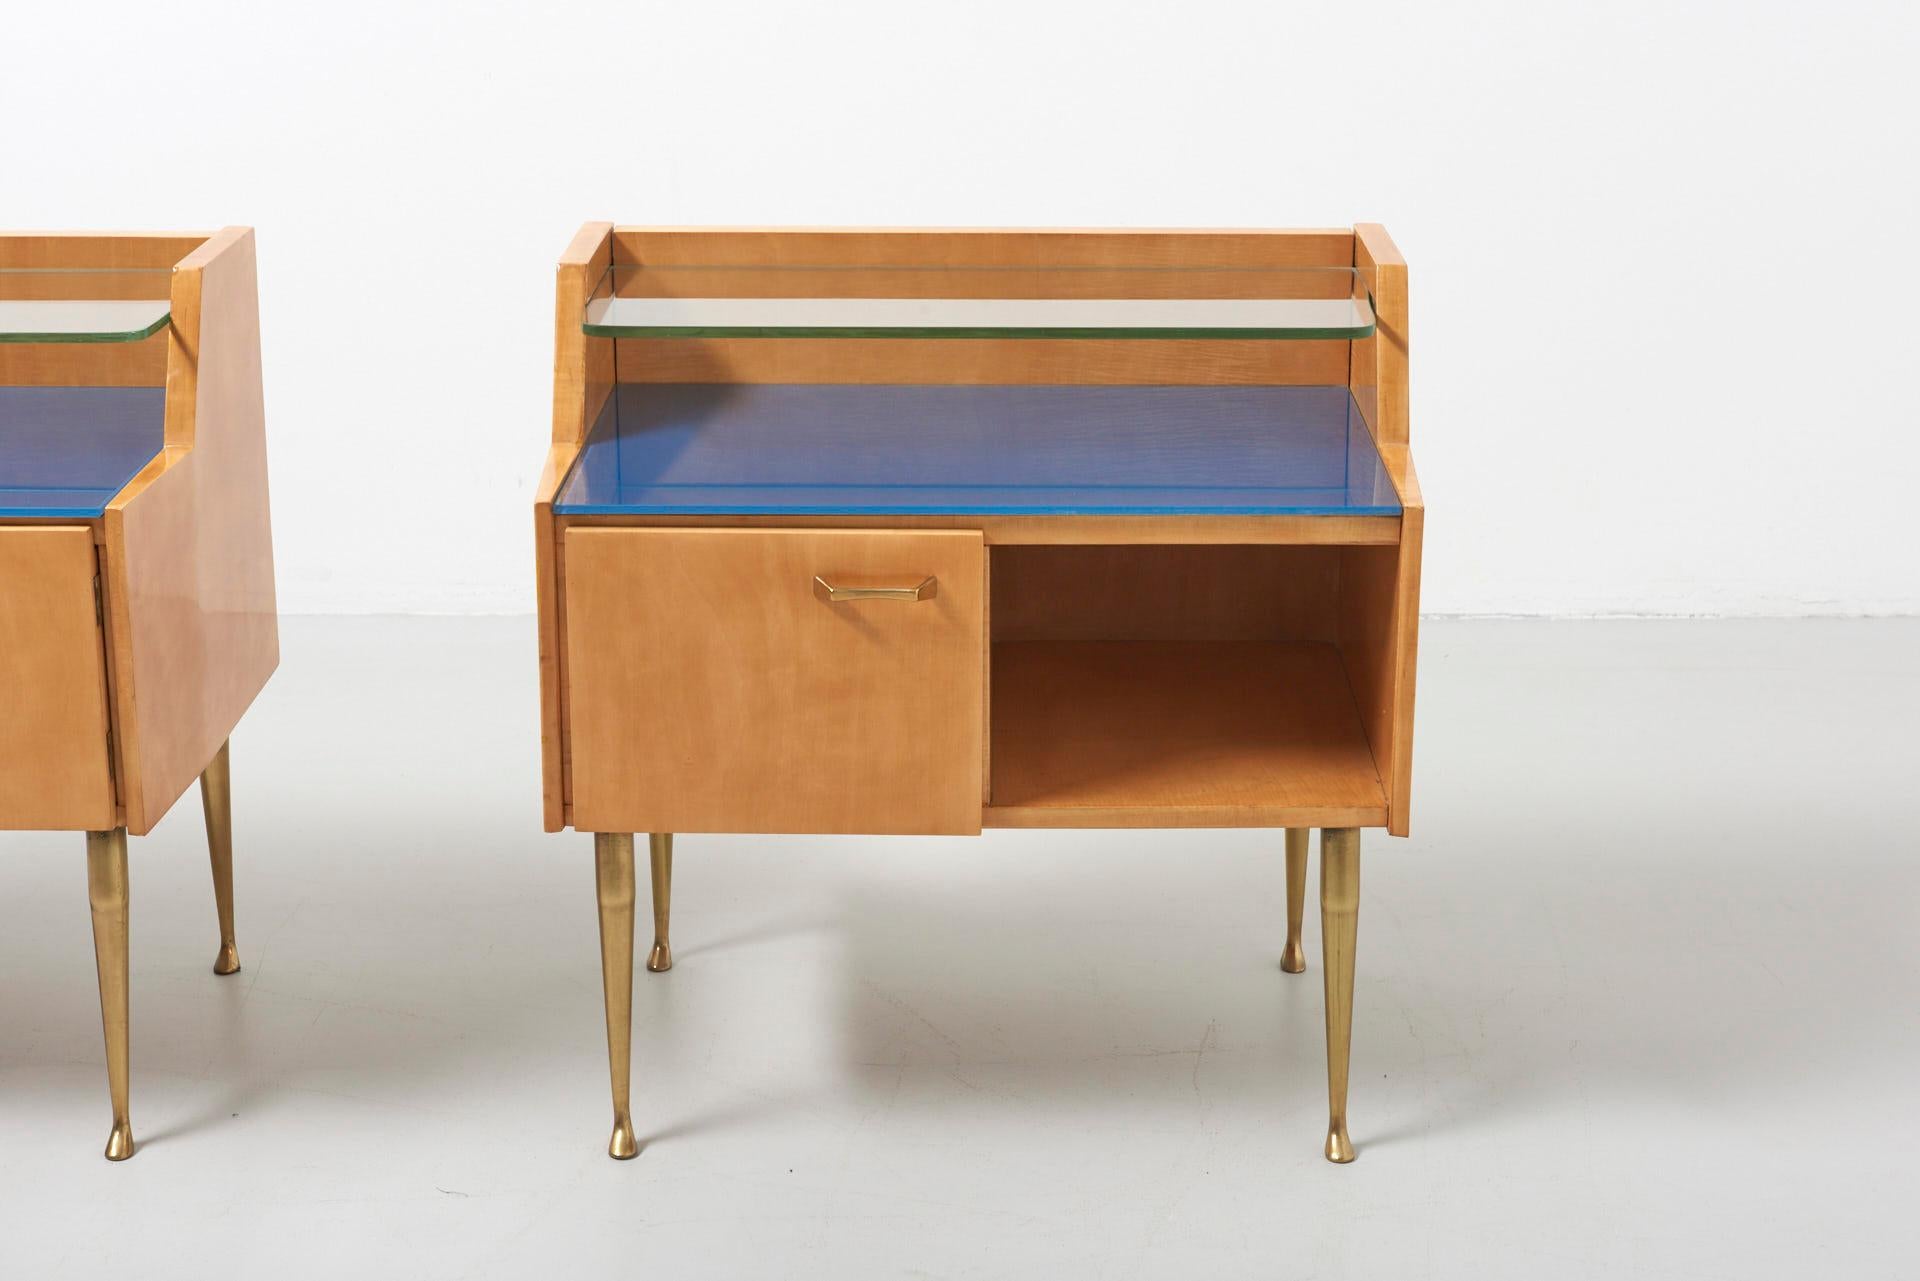 A pair bedside tables in maple with an original blue painted glass top, a glass shelf and brass feet.
Made in Italy in the 1950s.